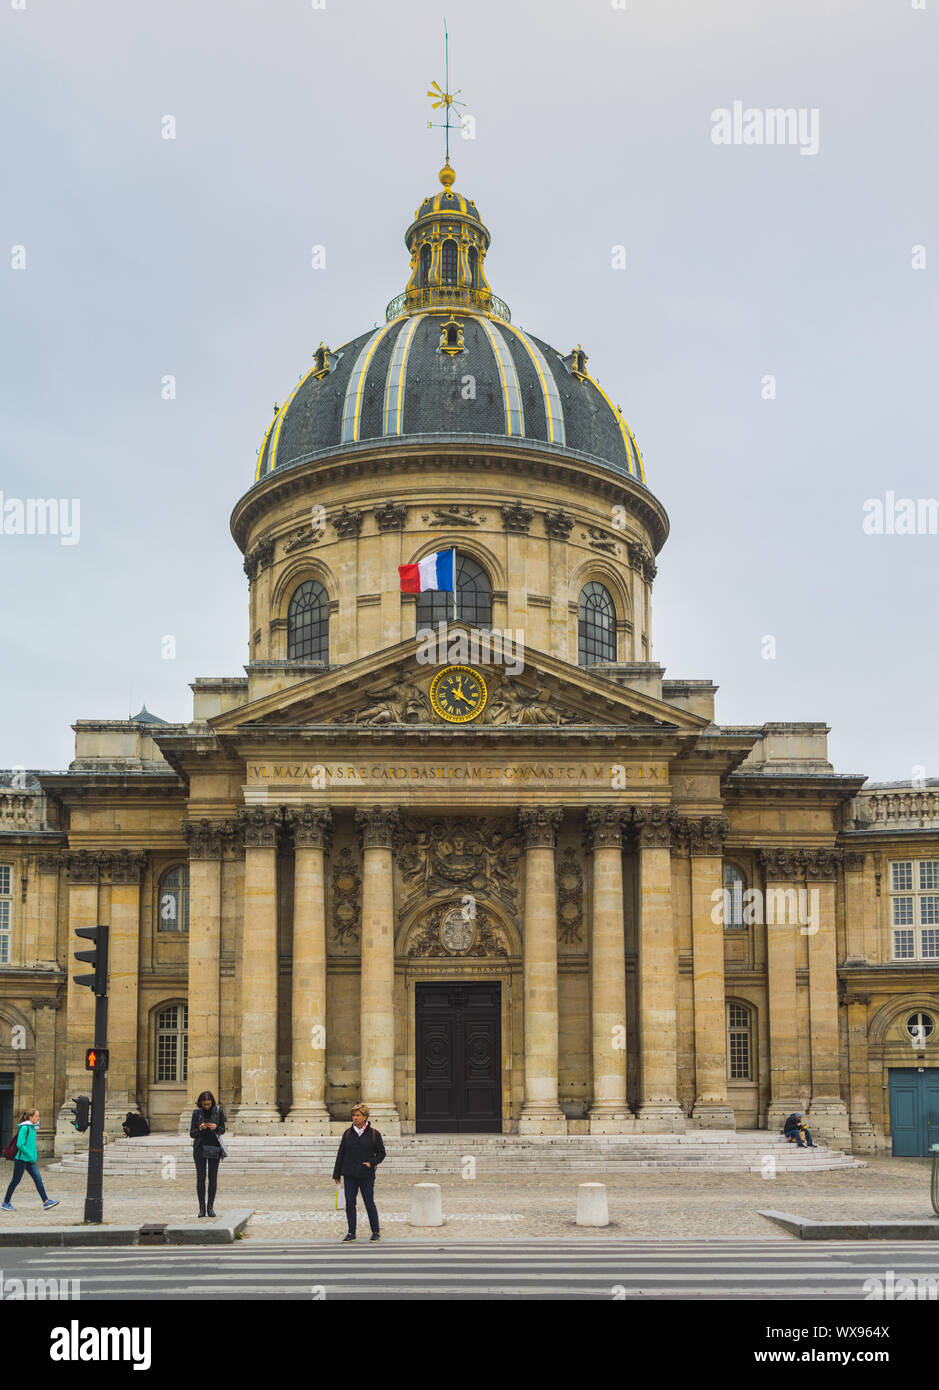 PARIS, FRANCE - 02 OCTOBER 2018: Orsay museum. Stock Photo